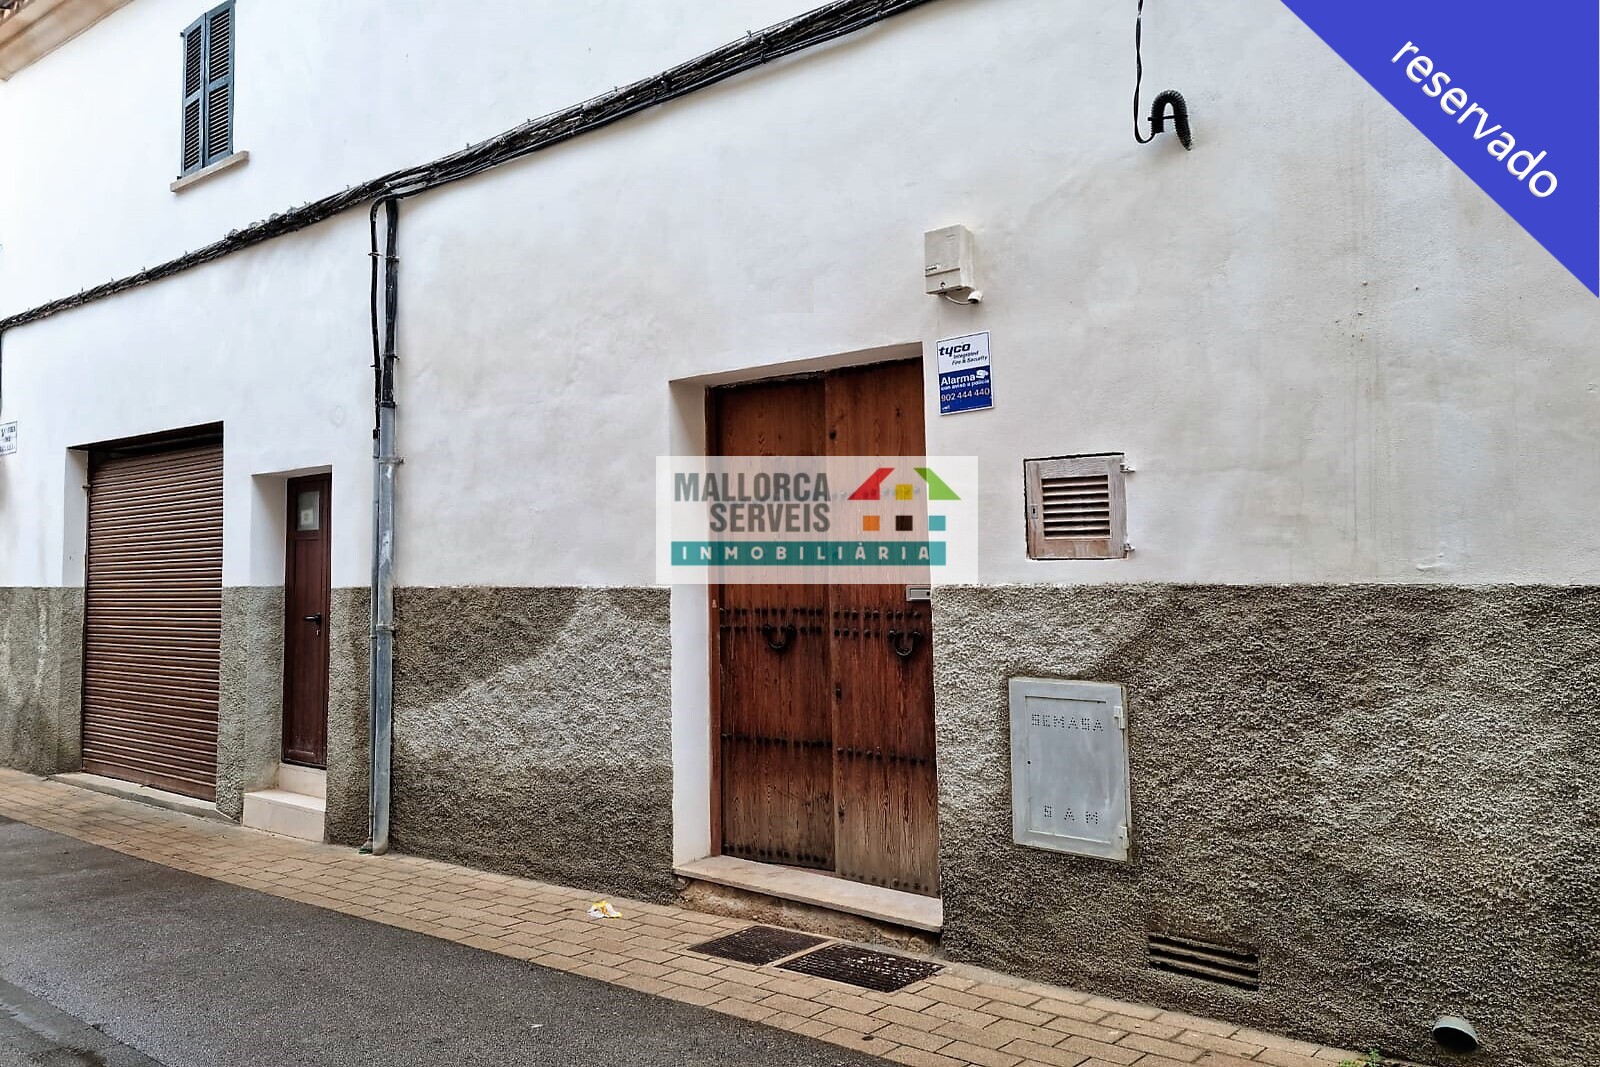 TOWNHOUSE WITH 2 NEW UNITS AND GARAGE NEAR MANACOR CENTRE